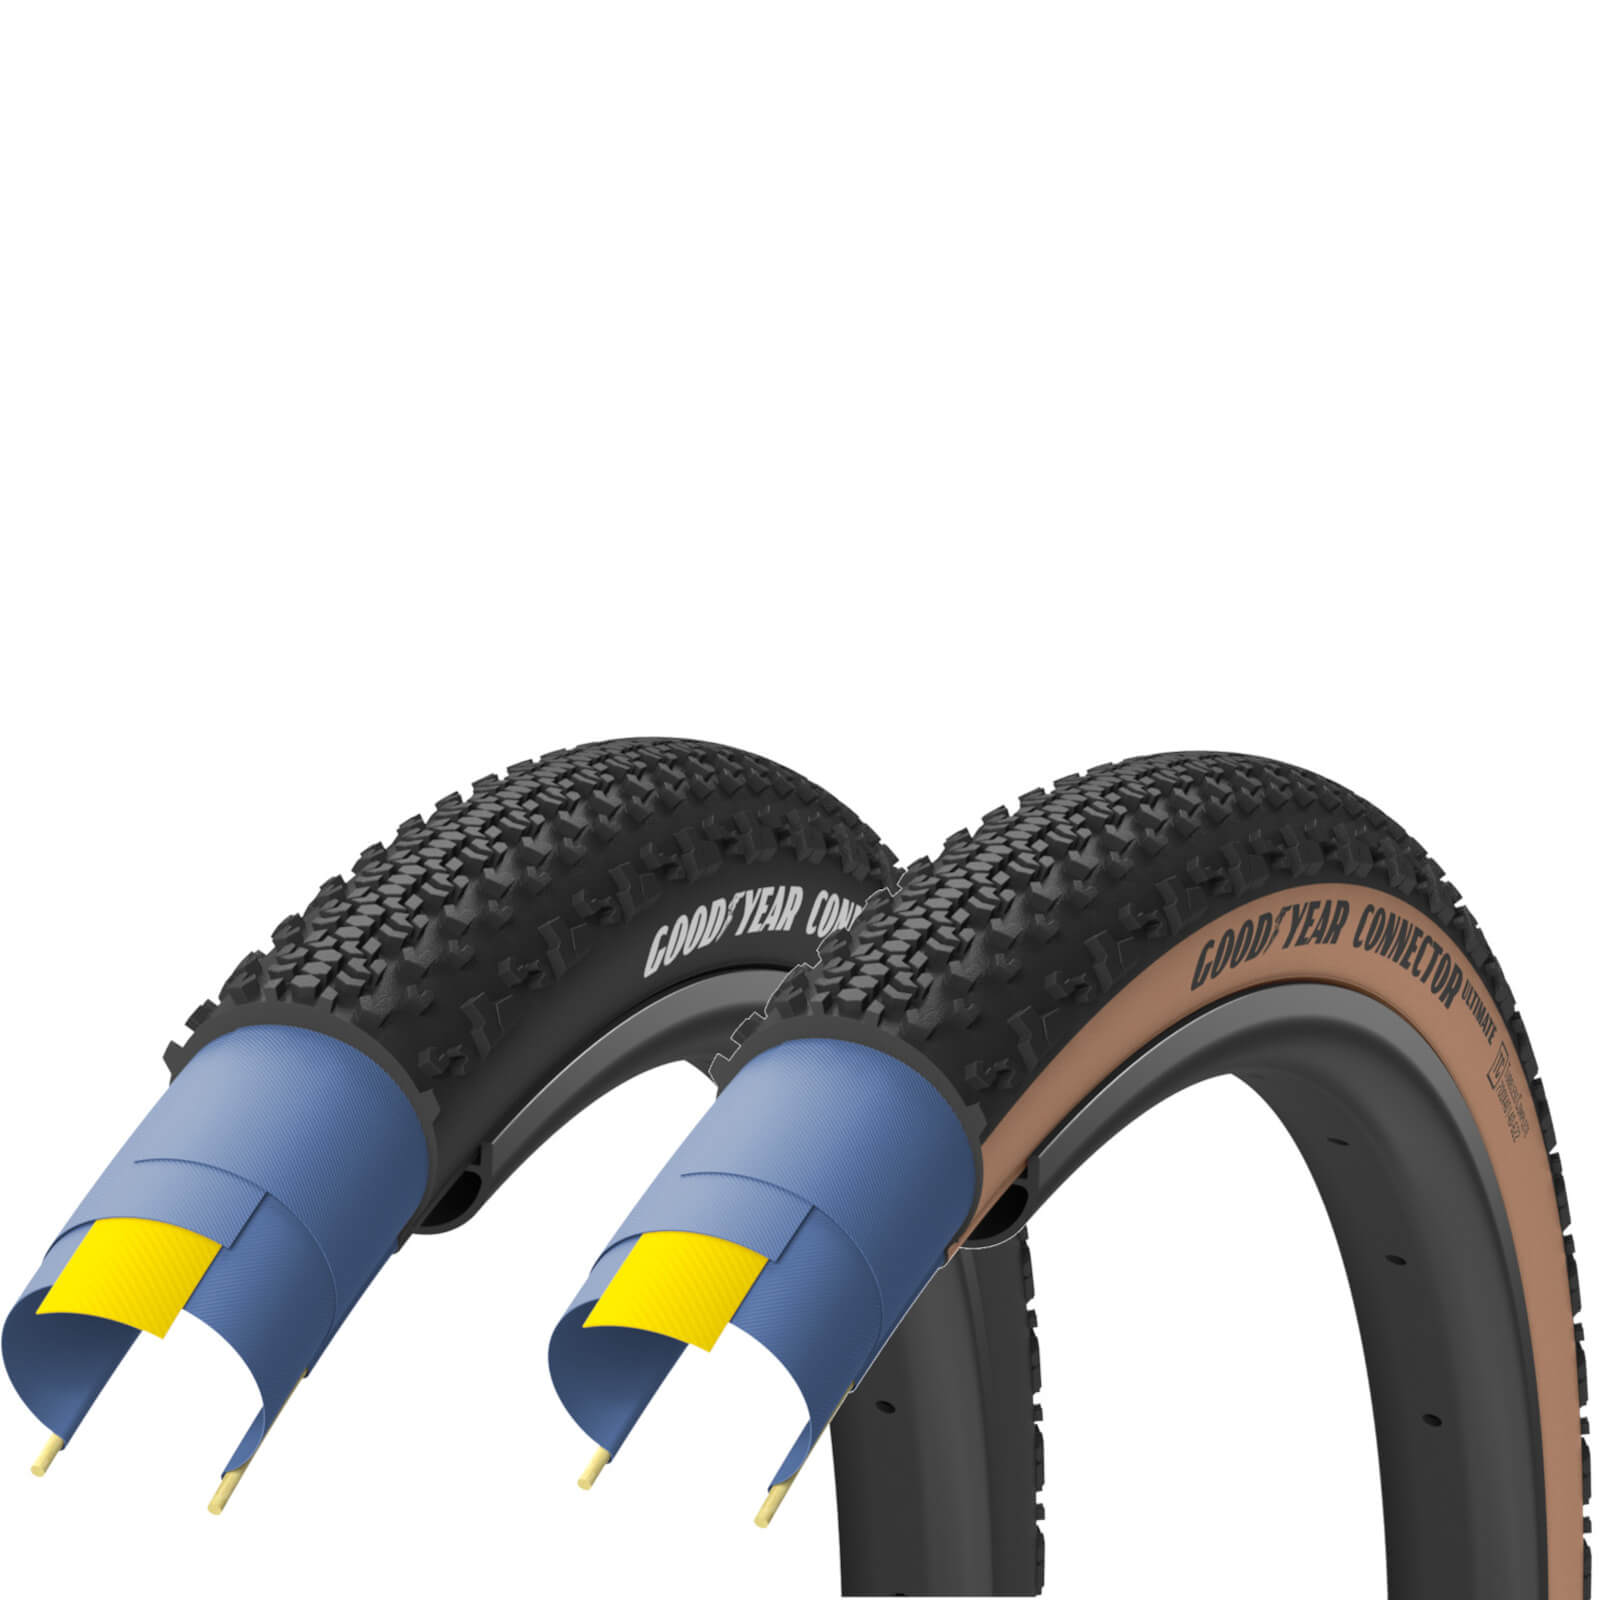 Goodyear Connector Ultimate A/T Tubeless Gravel Tyre - 700c x 40mm - Black